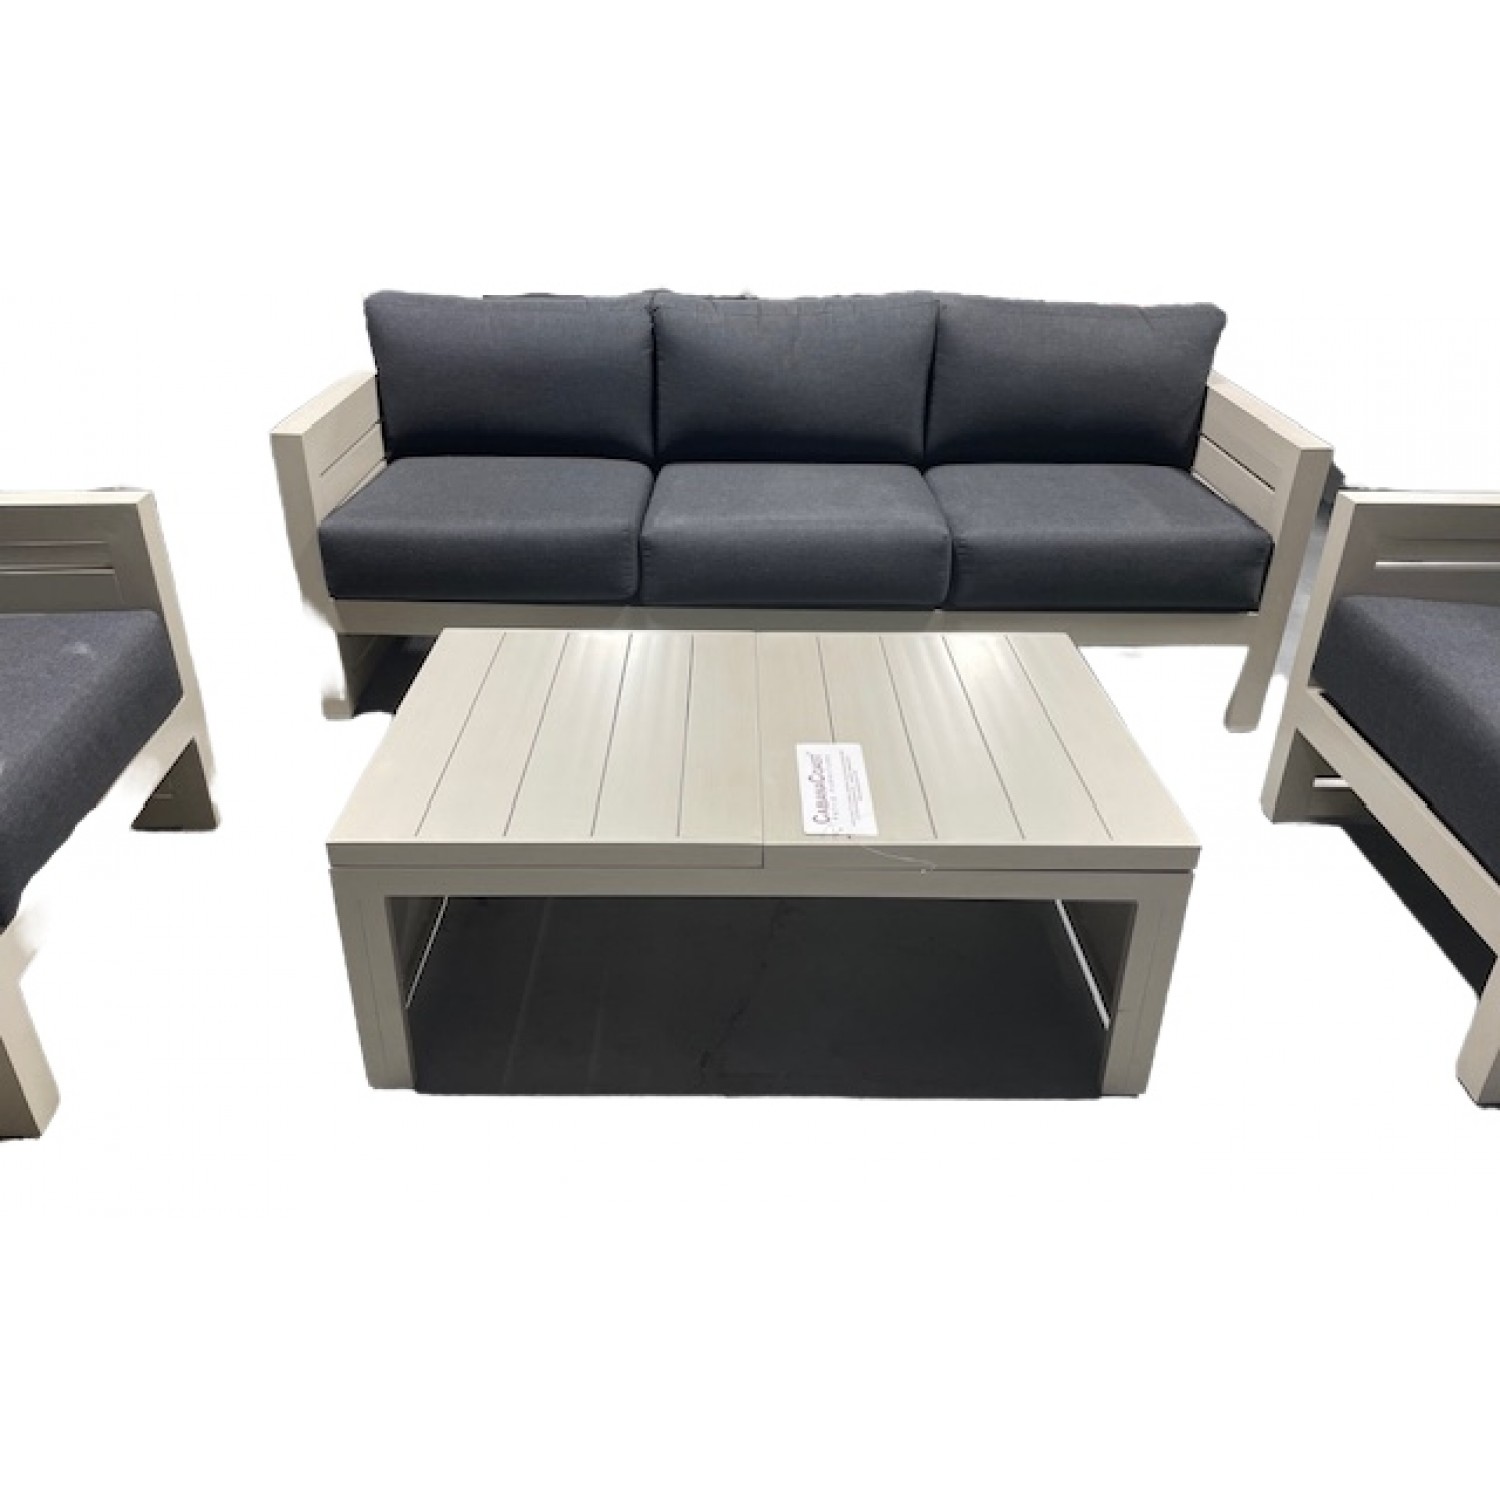 Lakeview Outdoor Sofa Set Dove